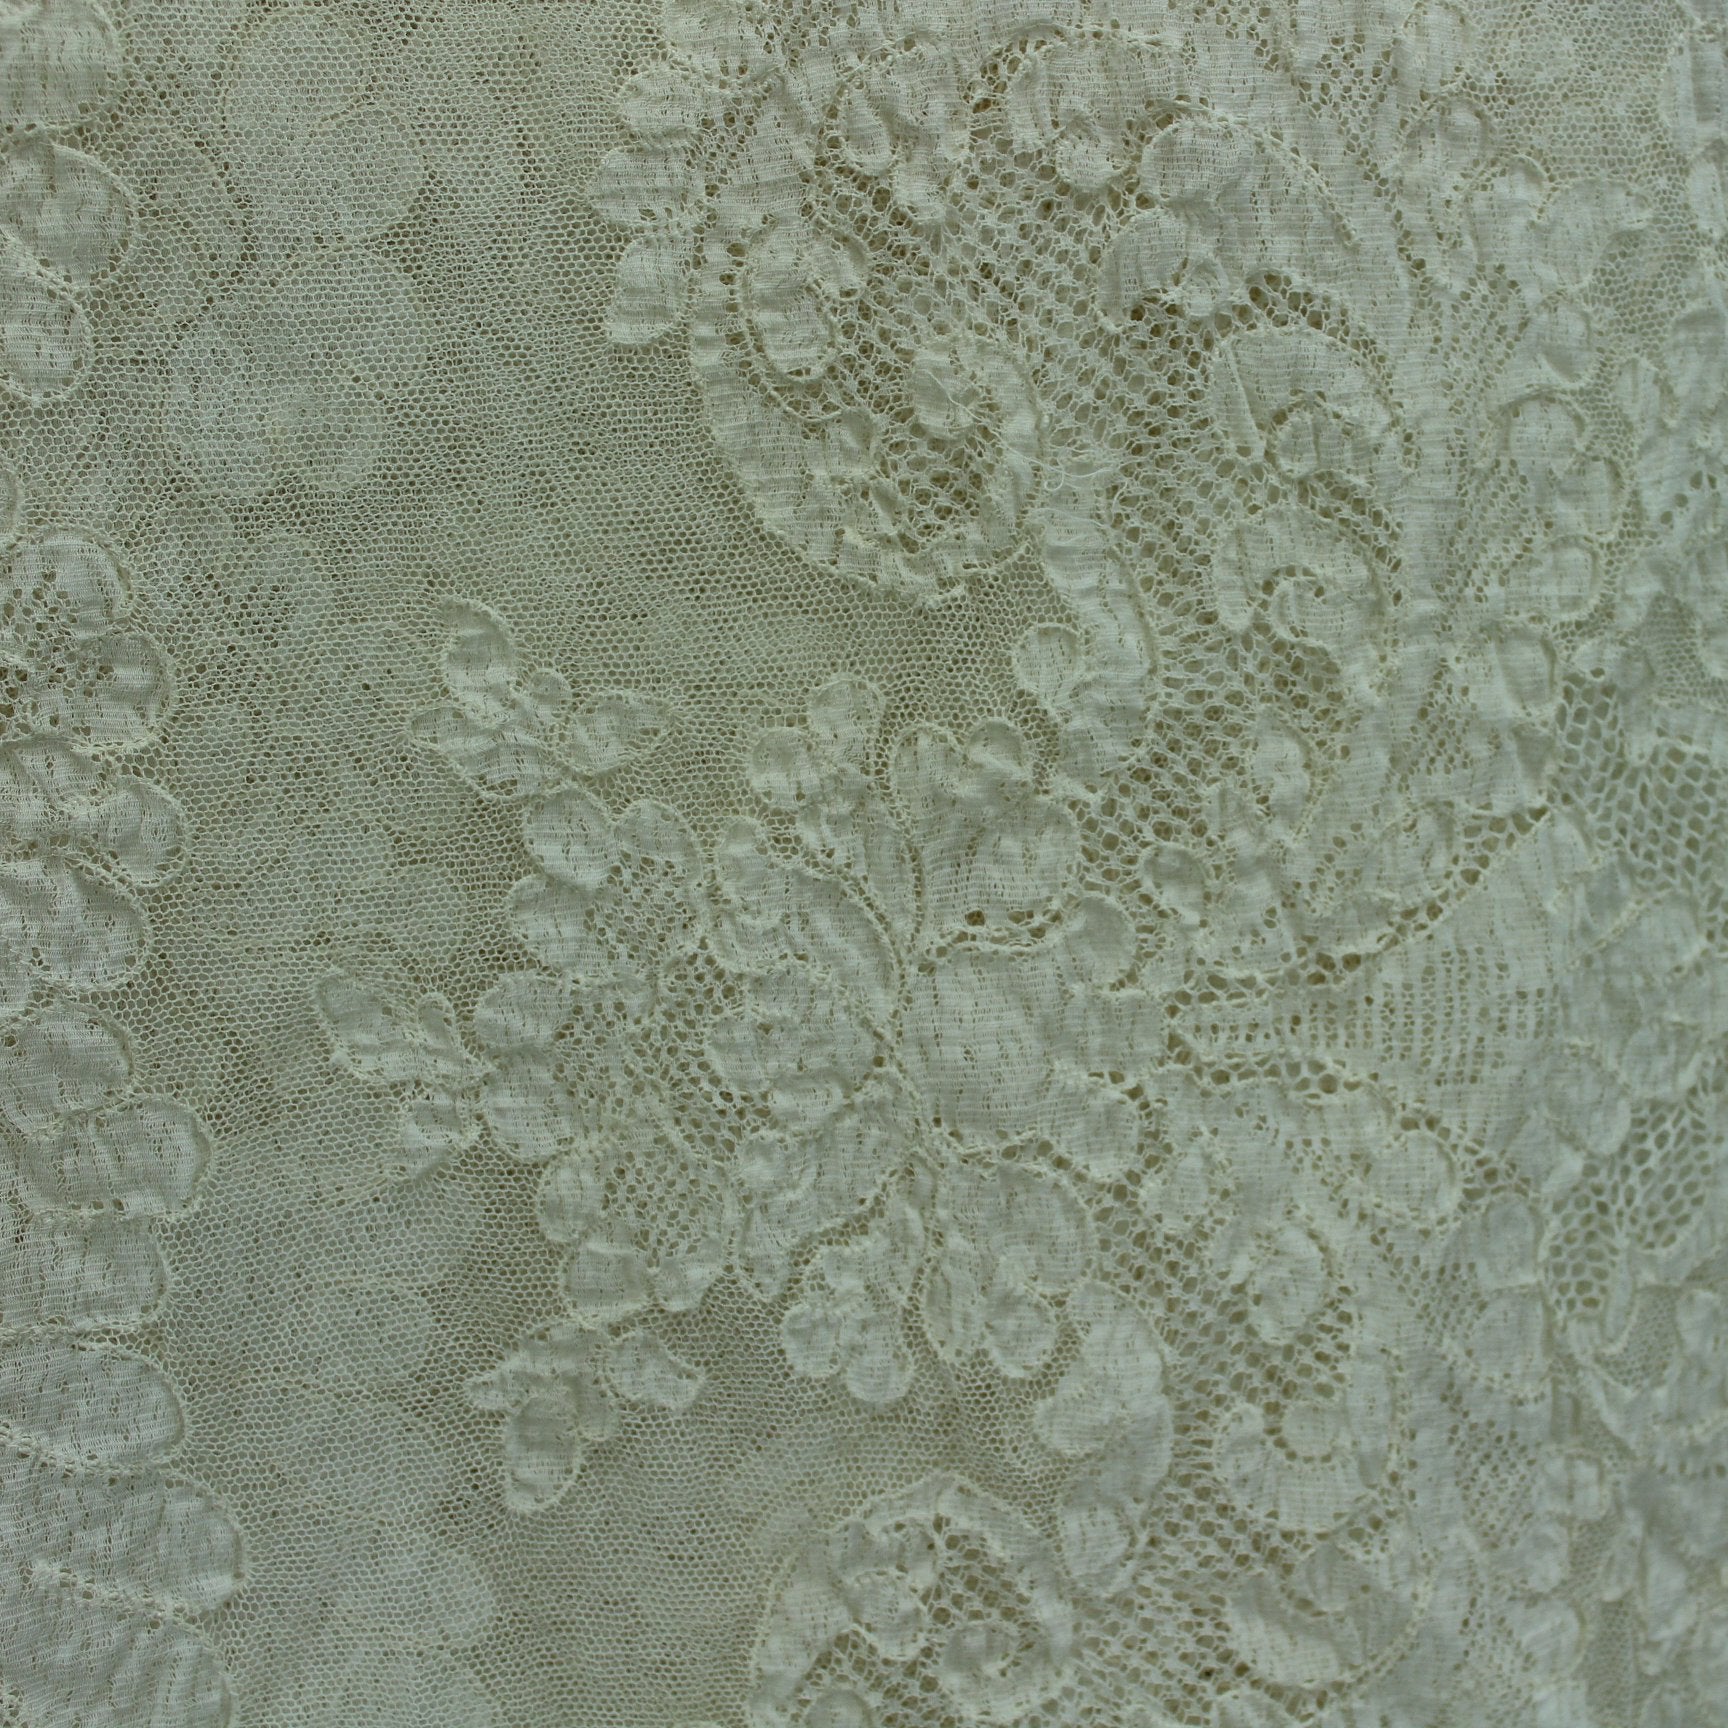 Alencon Cream Lace Tablecloth France Made for Marshall Field Exquisite closeup pattern